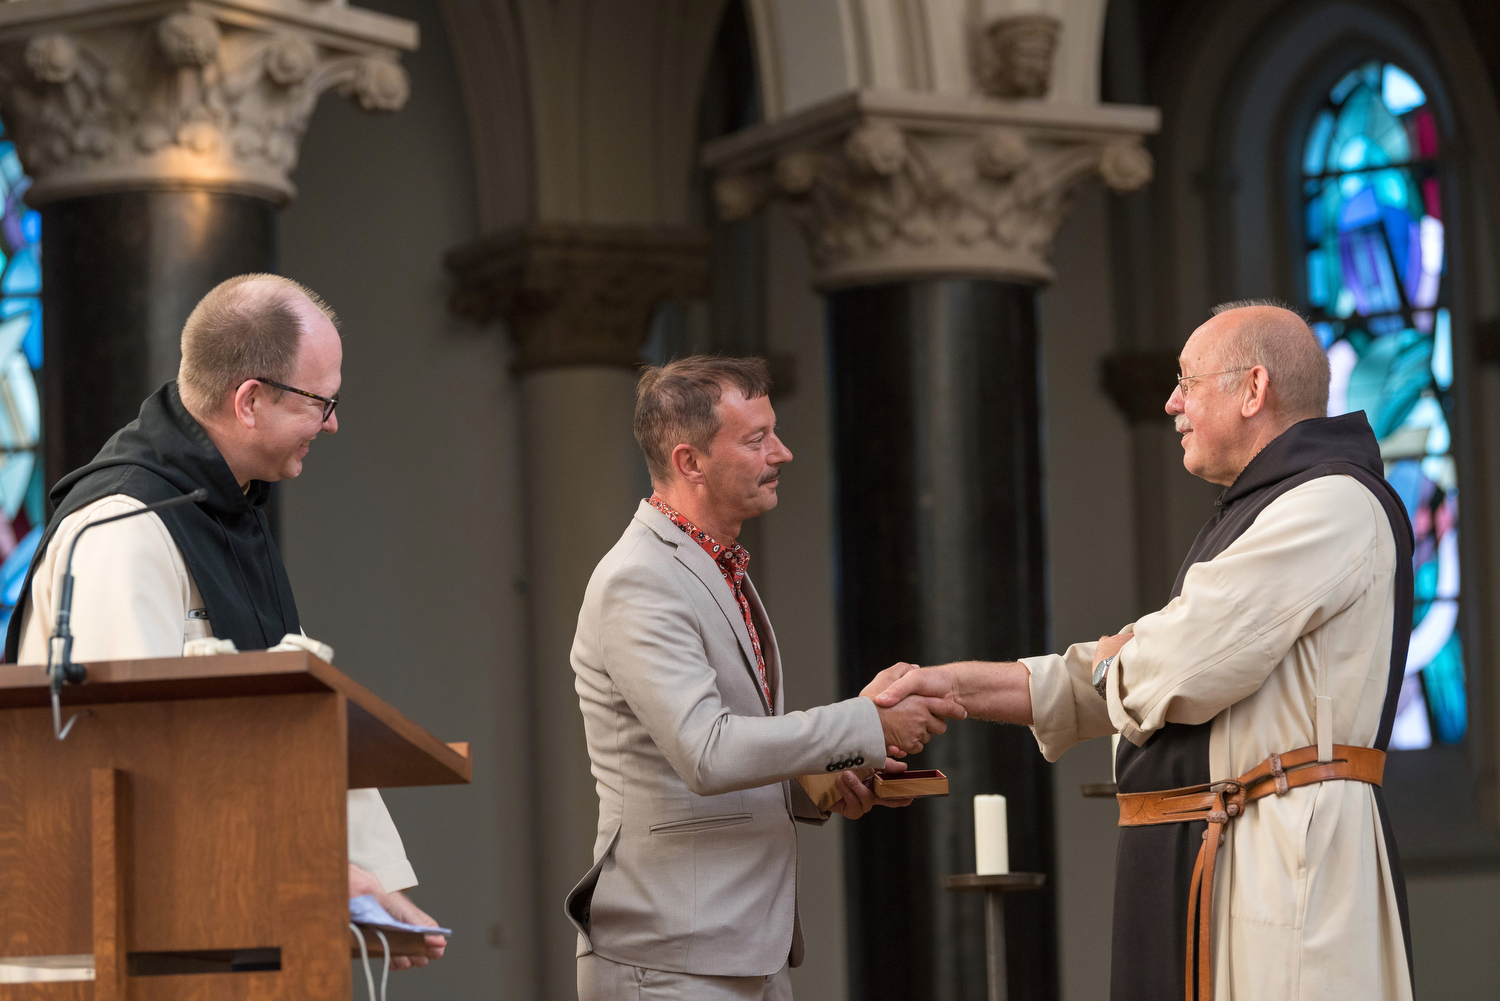 István Koller received an honorary award from the Abbey